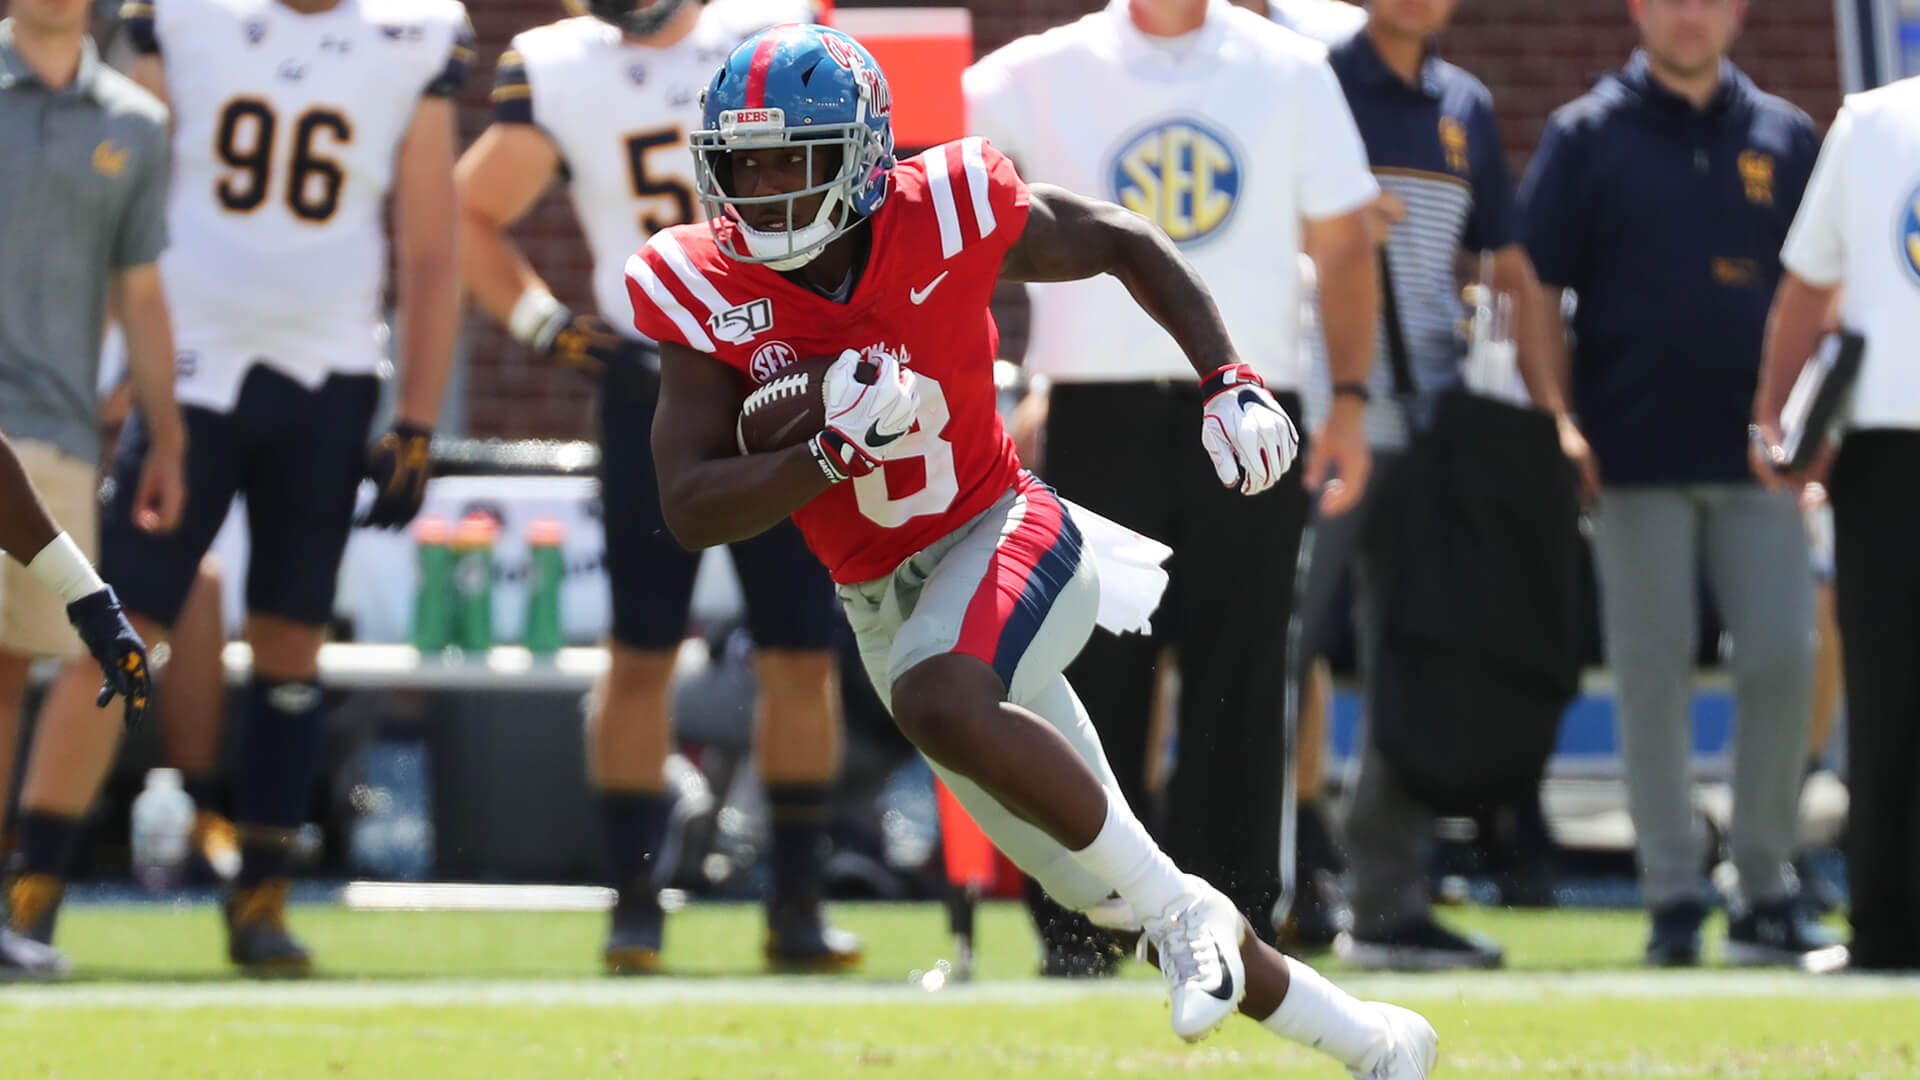 Ole Miss’s Elijah Moore Added to Maxwell Watch List